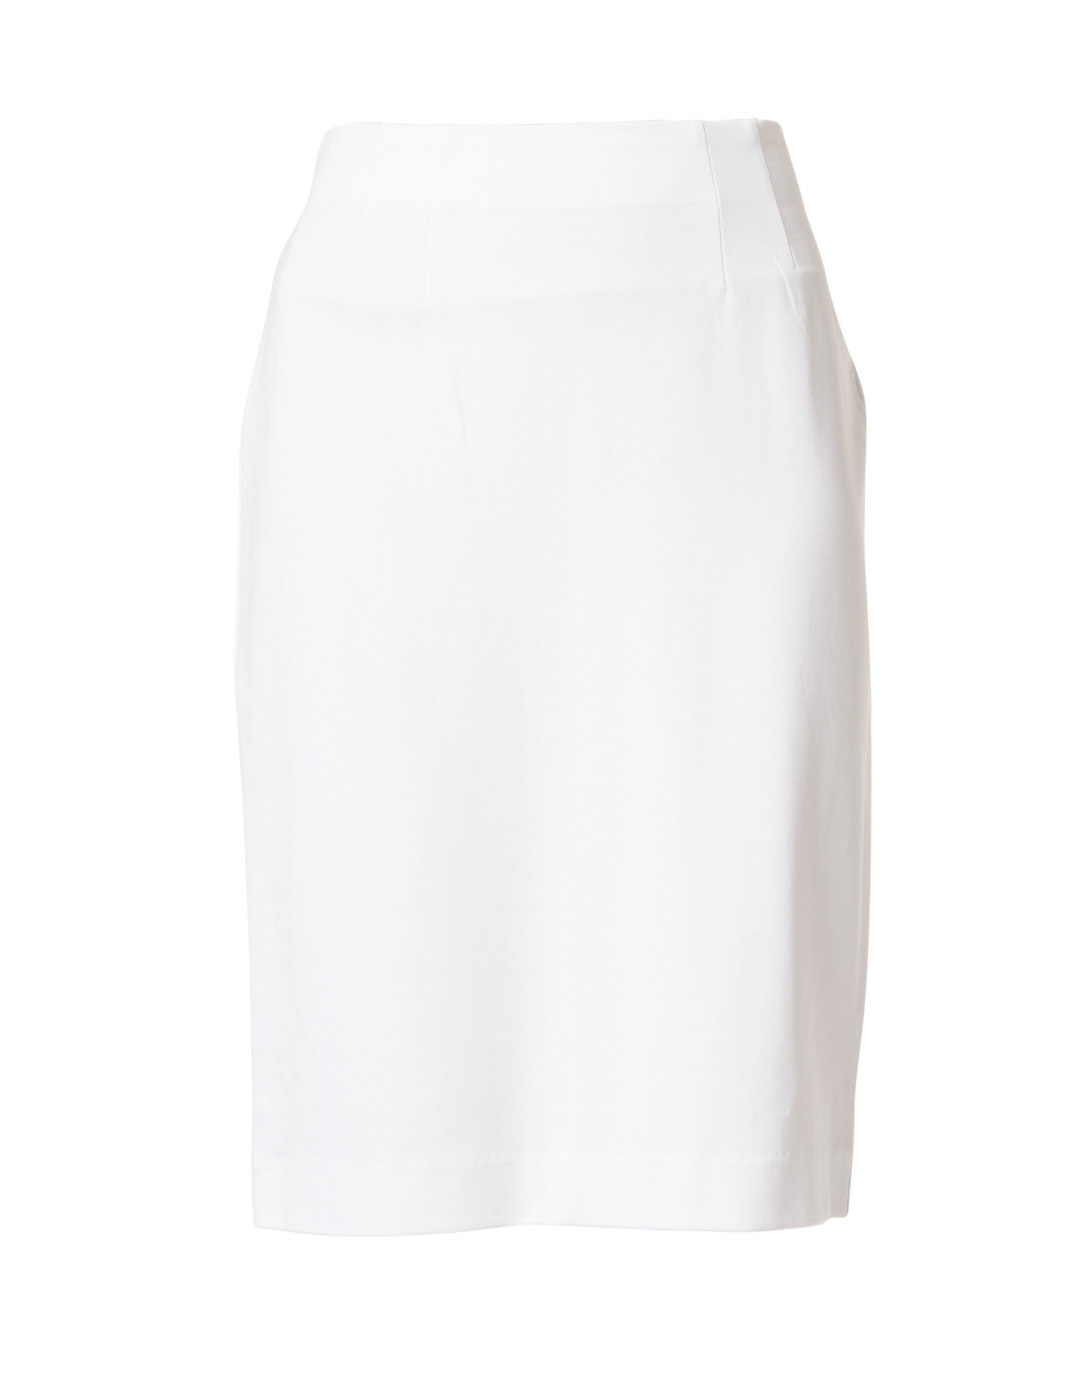 Logan White Knit Pull-On Skirt | Peace of Cloth